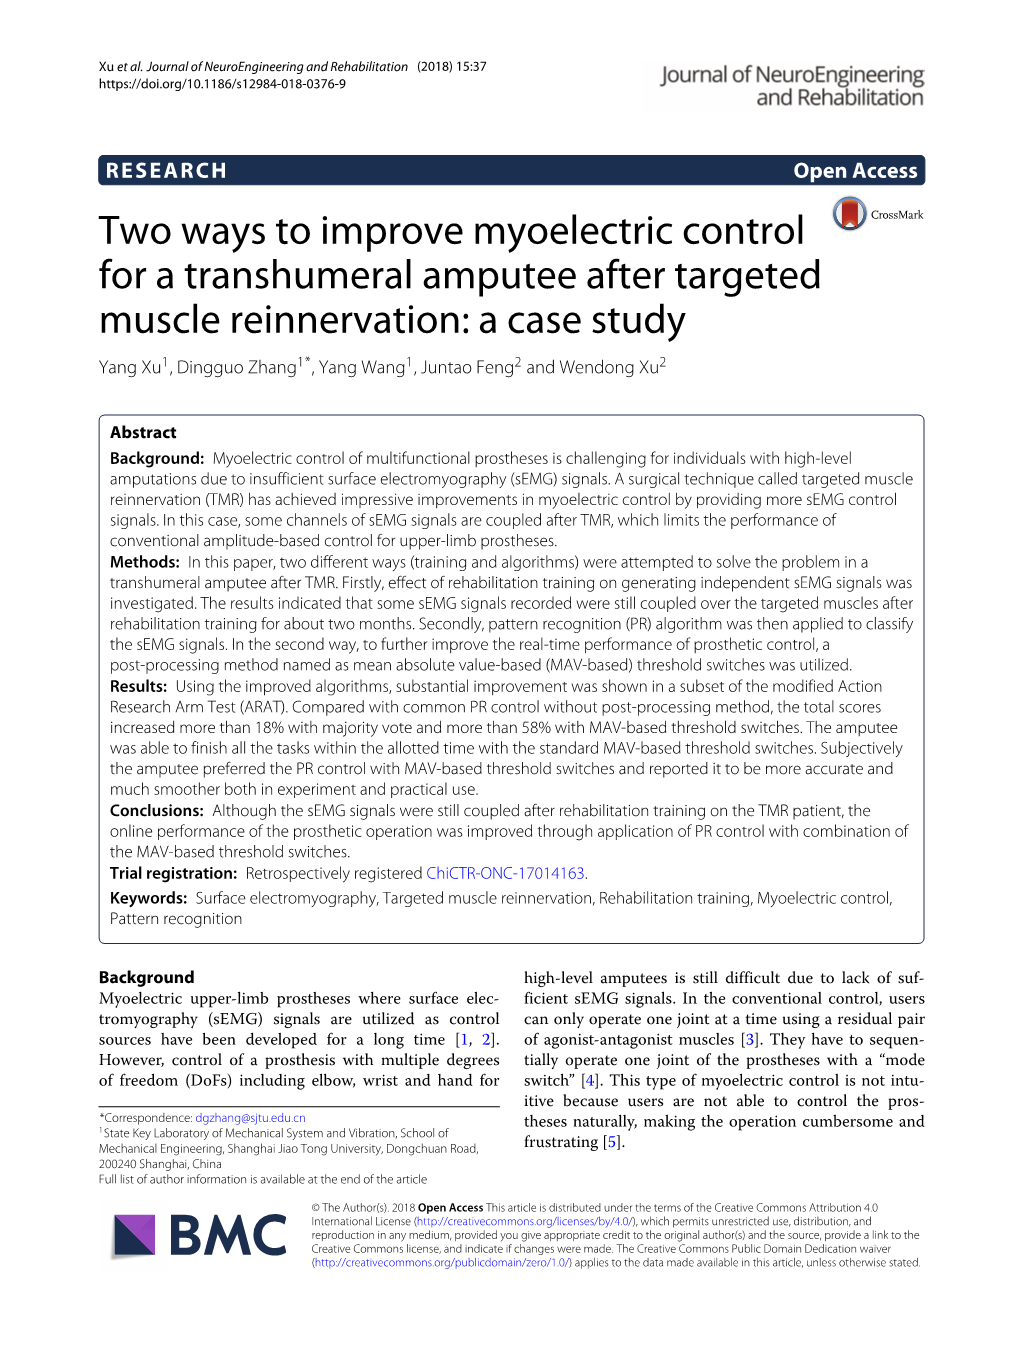 Two Ways to Improve Myoelectric Control for a Transhumeral